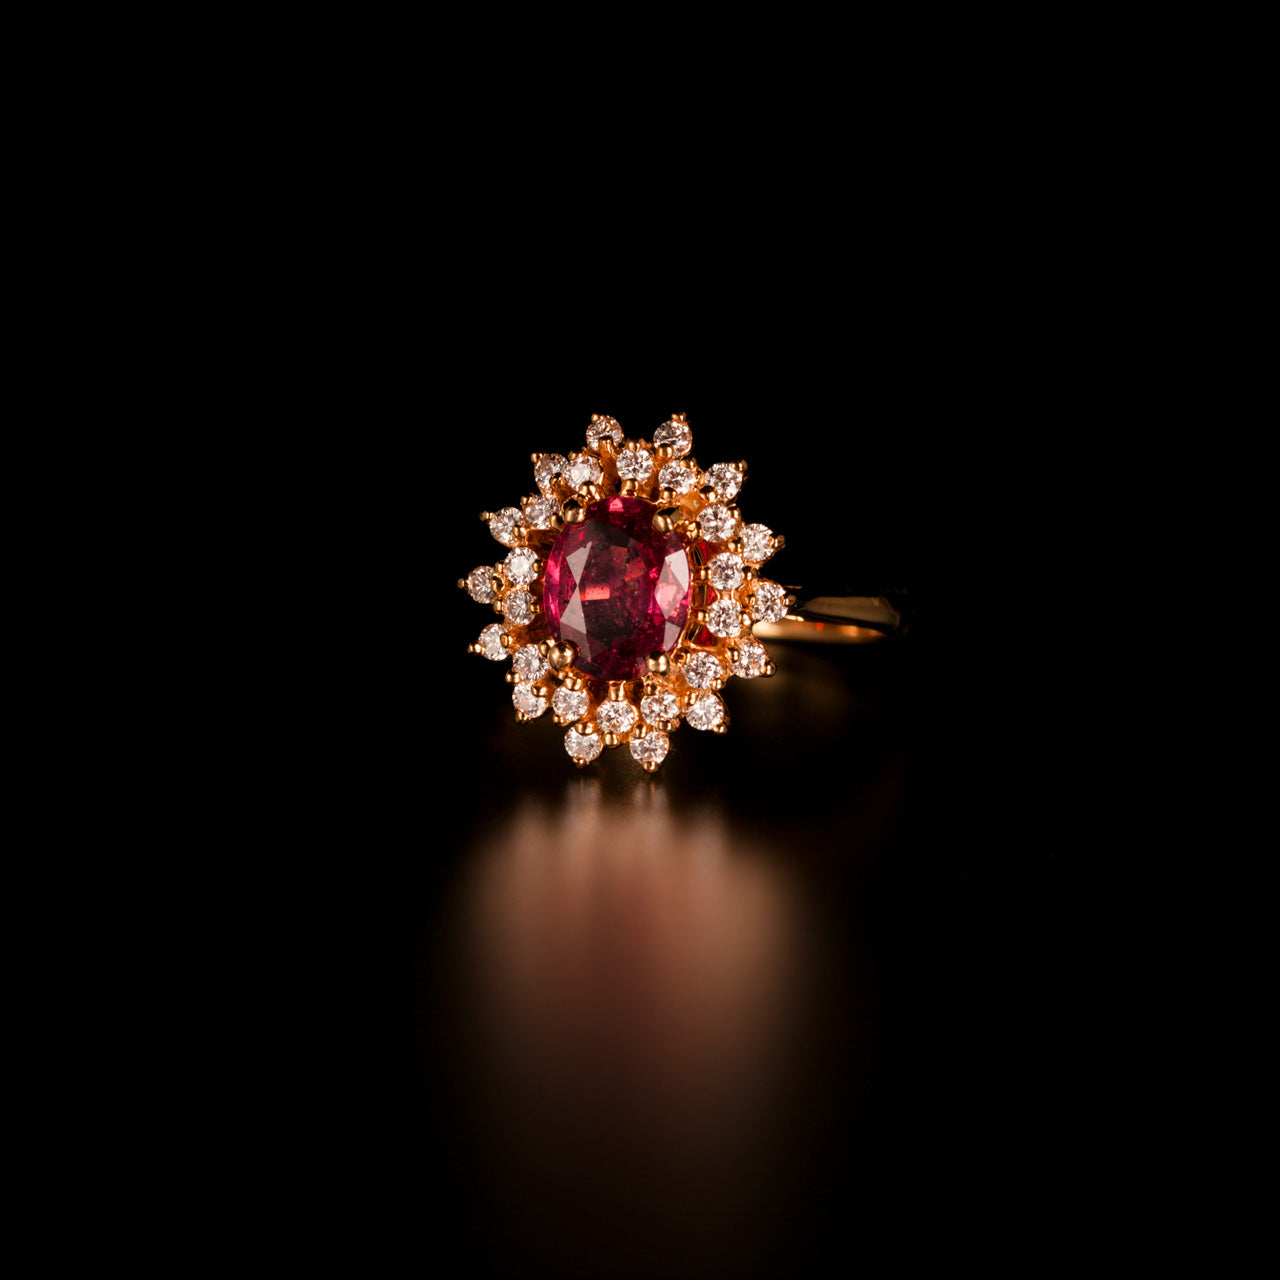 A detailed view of a 1.28ct pink sapphire and diamond ring in an 18k yellow gold setting